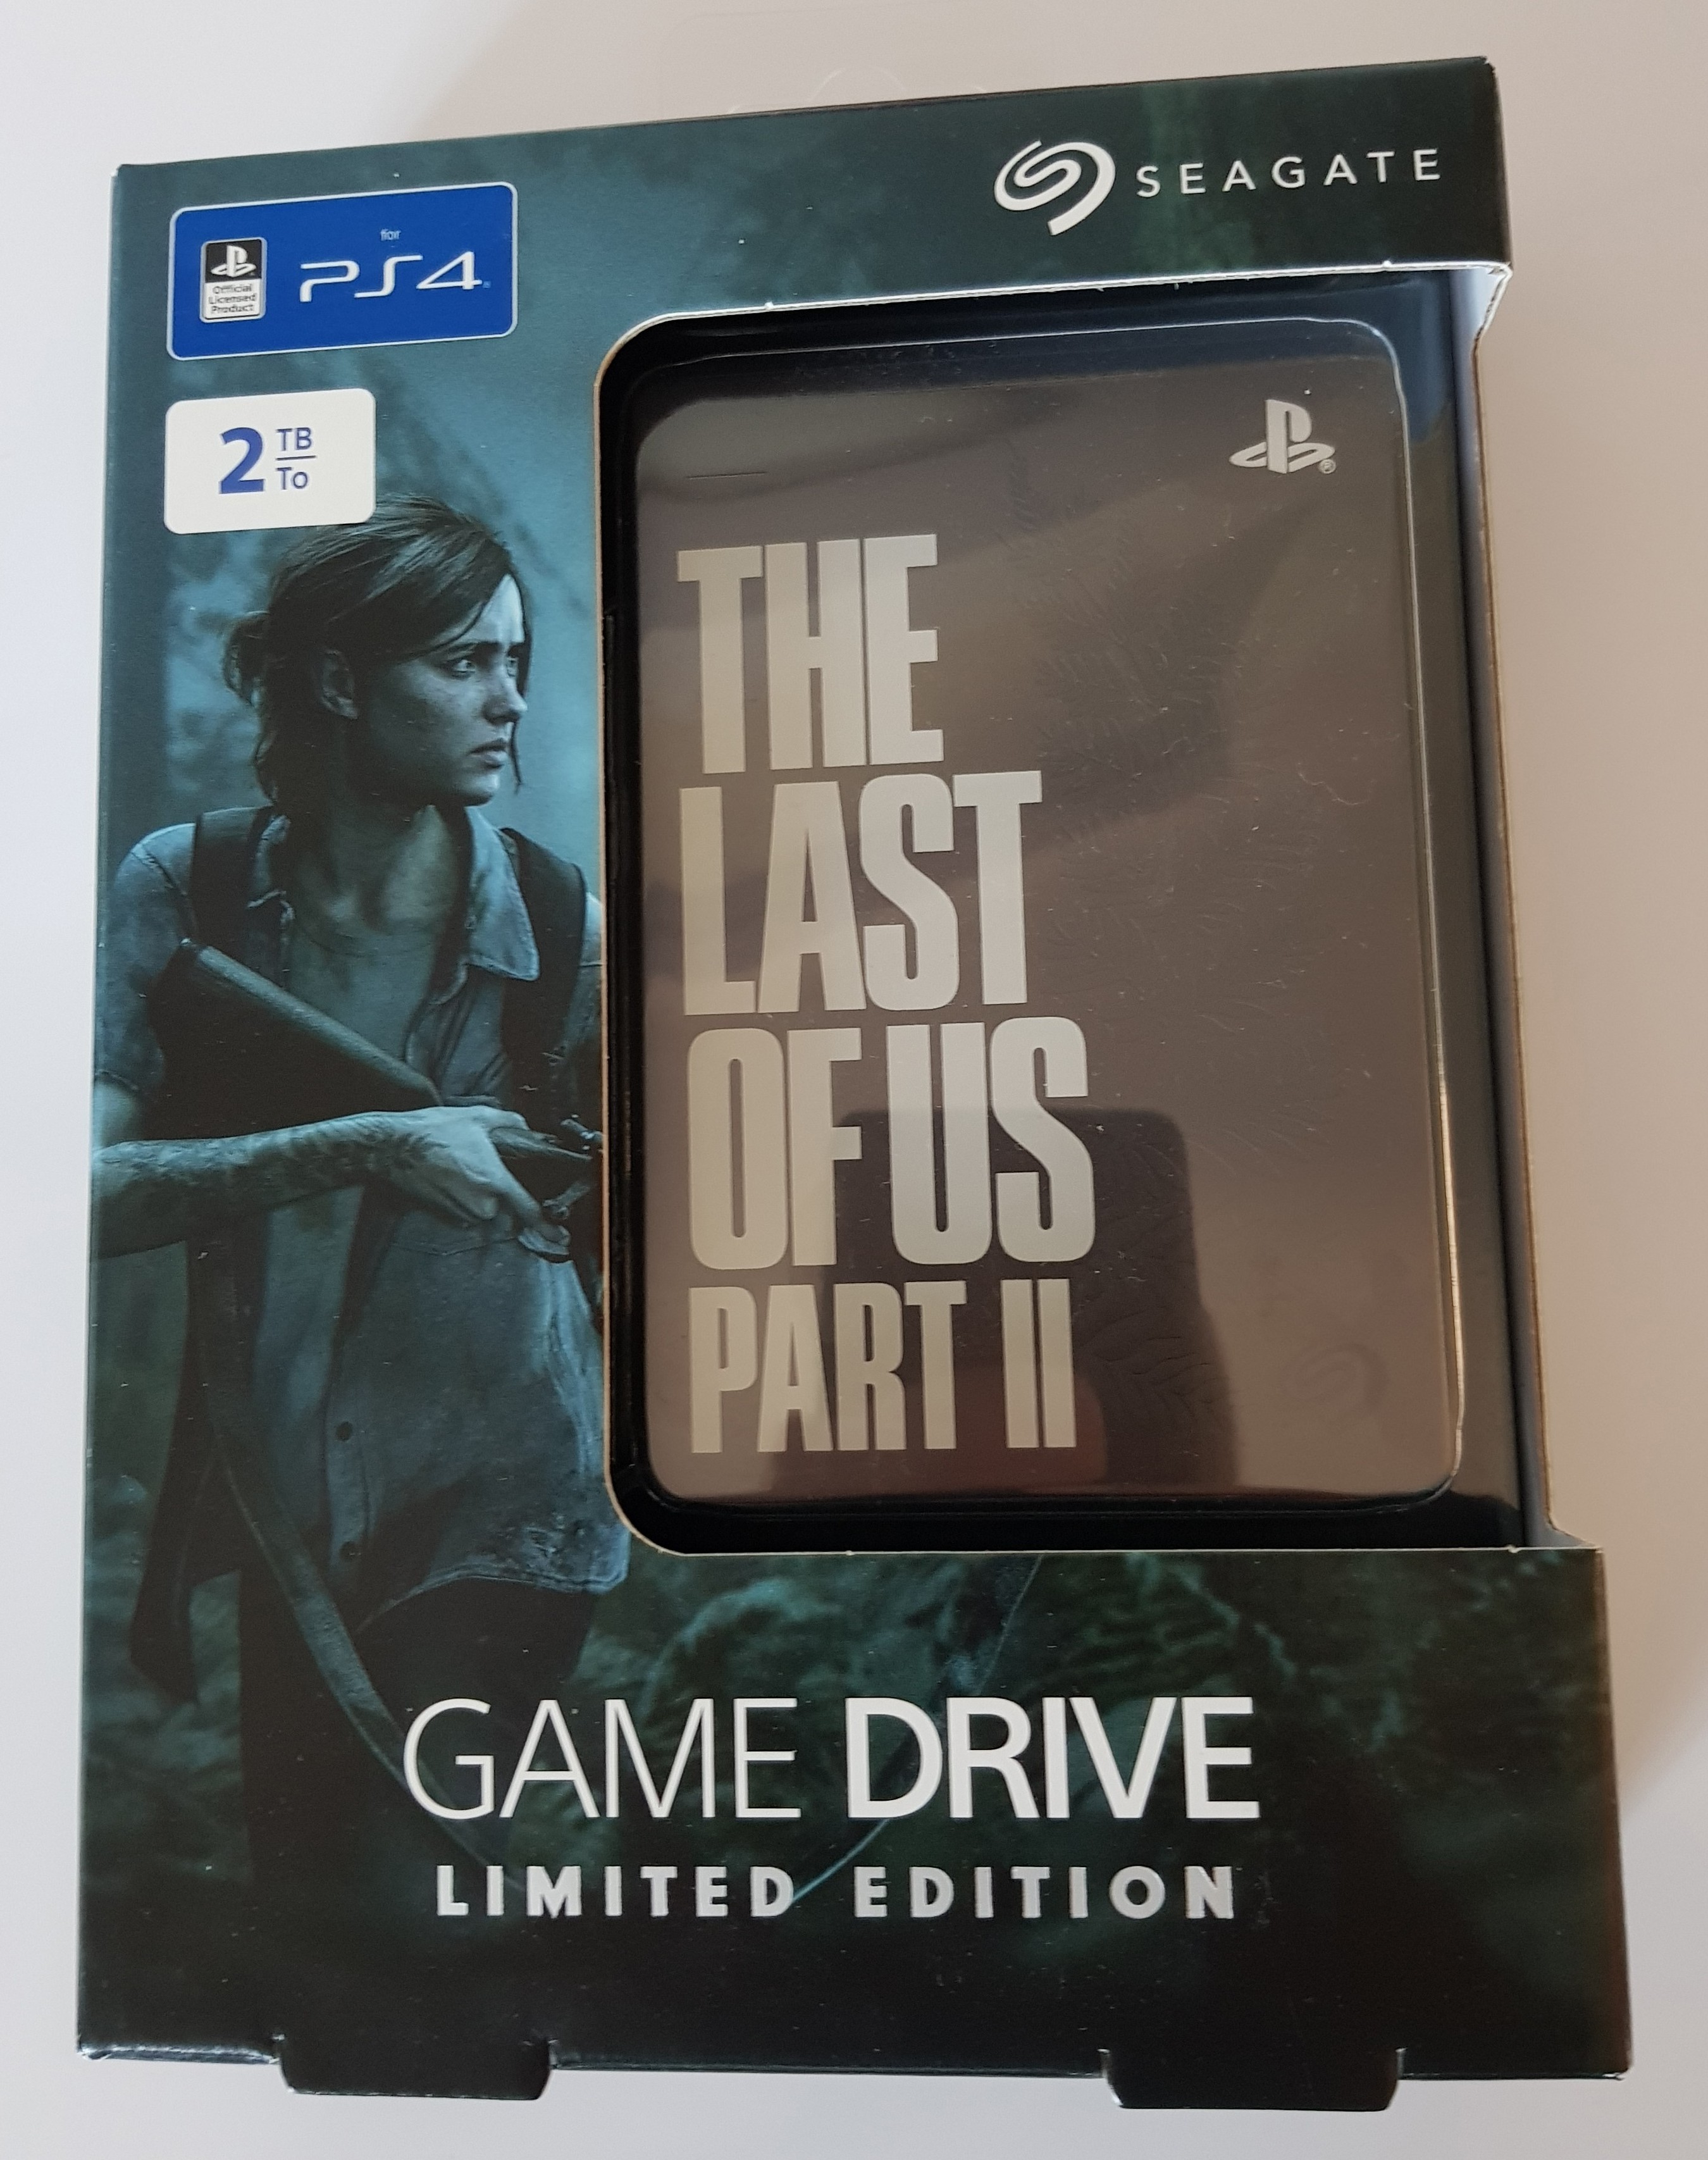 Seagate Game Drive : le HDD externe de 2 To sous licence